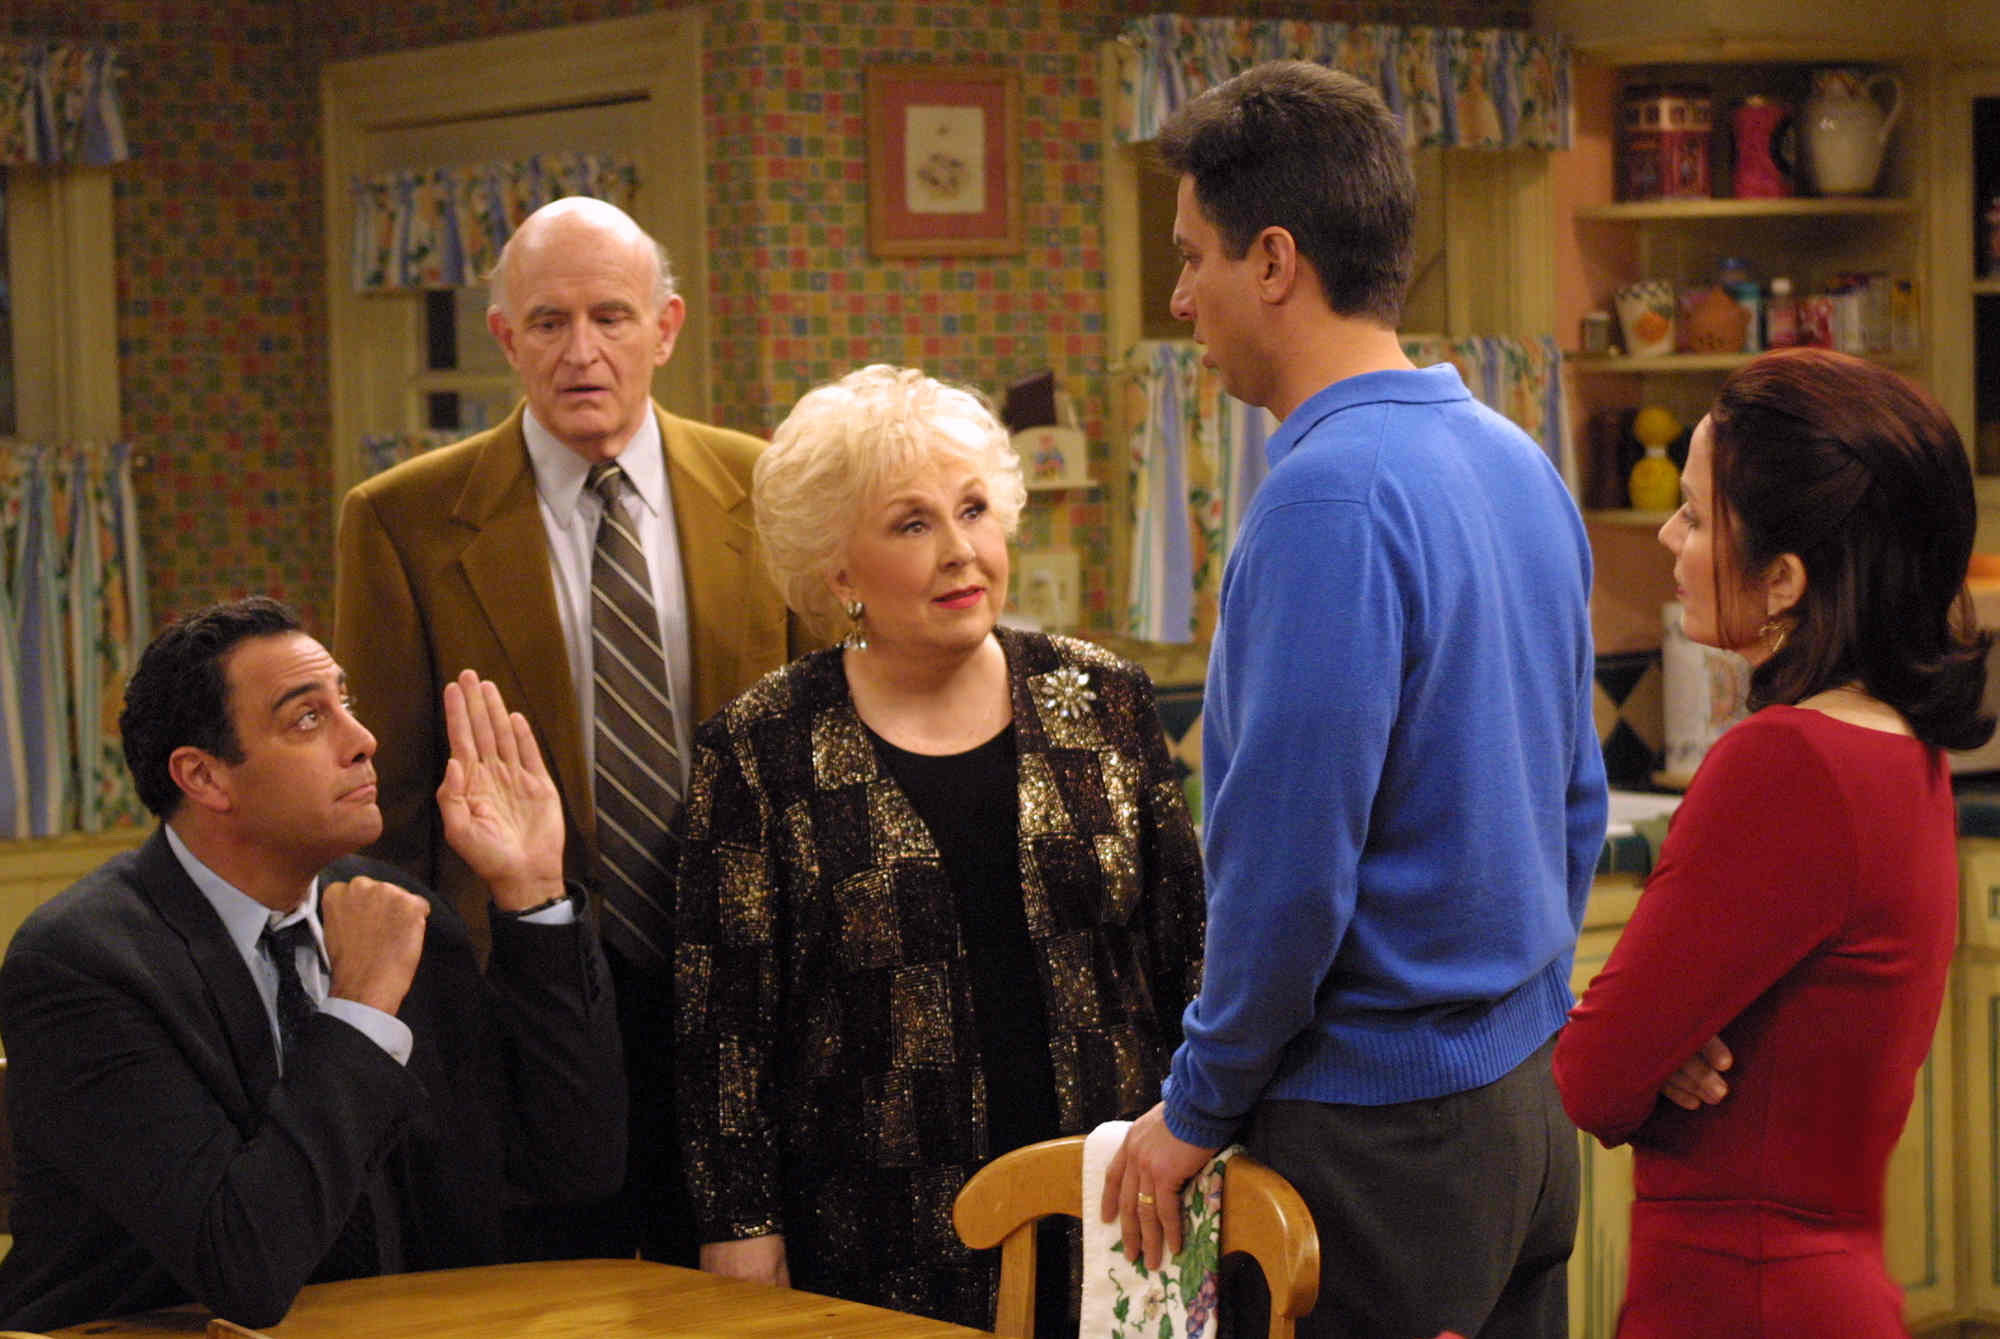 Marie, Debra, Raymond, Robert, and Frank Barone are huddled around a table, having one of their typical family altercations.